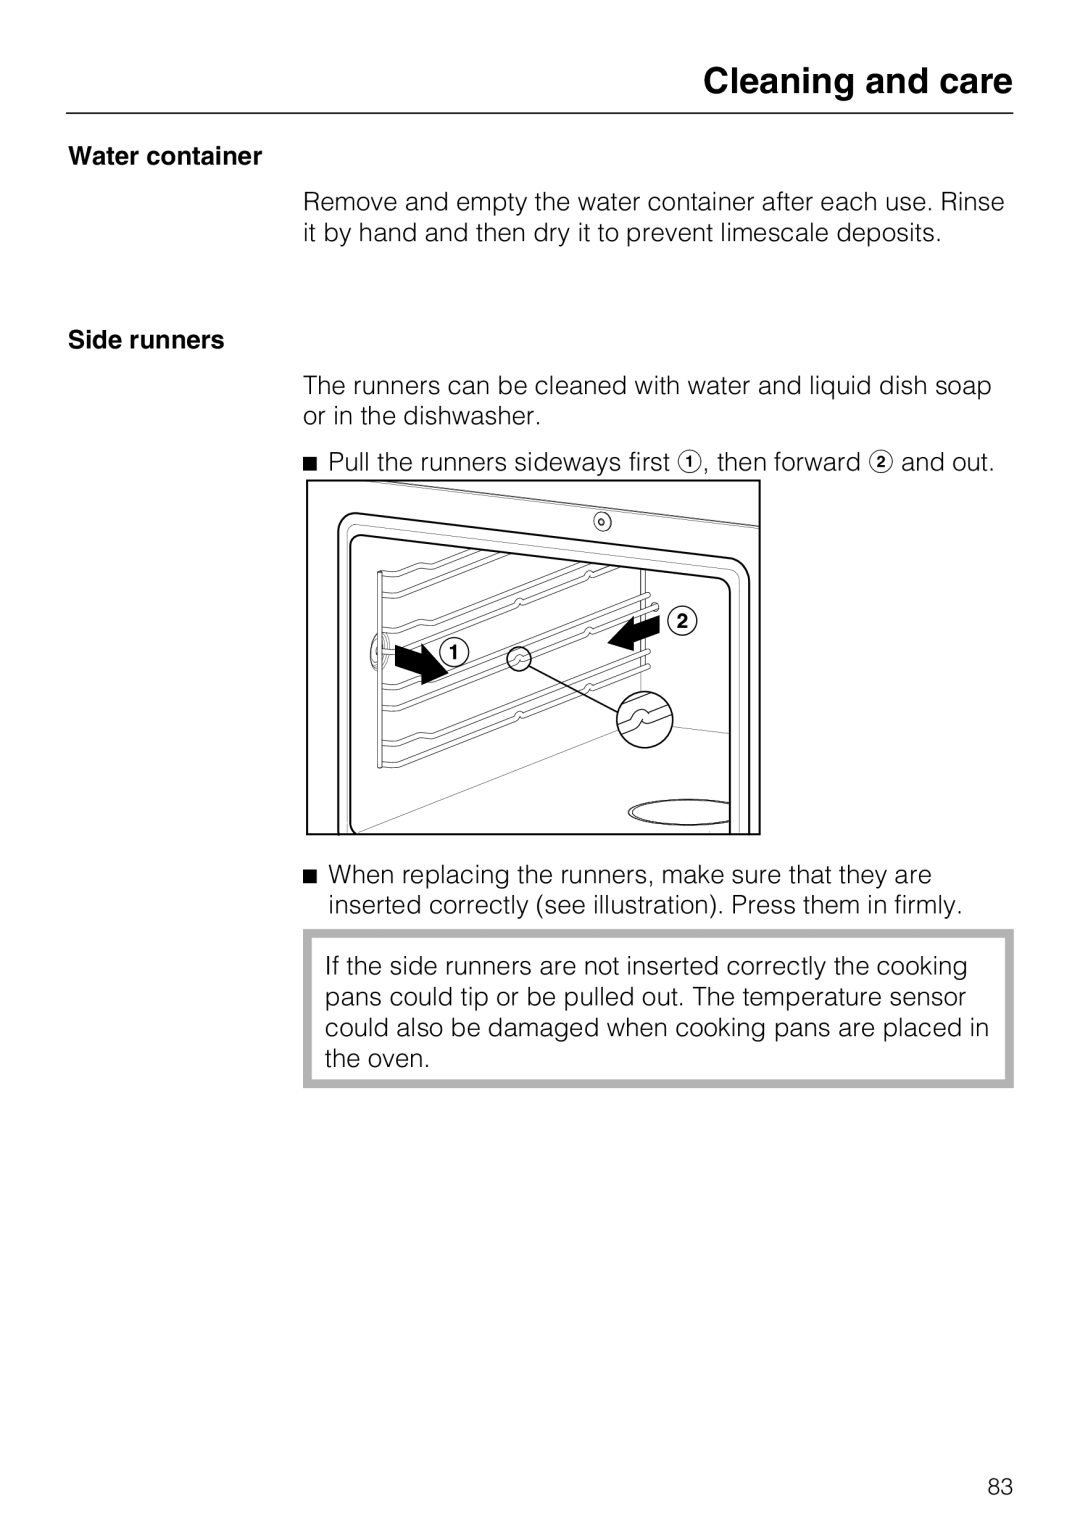 Miele 09 800 830 installation instructions Cleaning and care, Water container, Side runners 